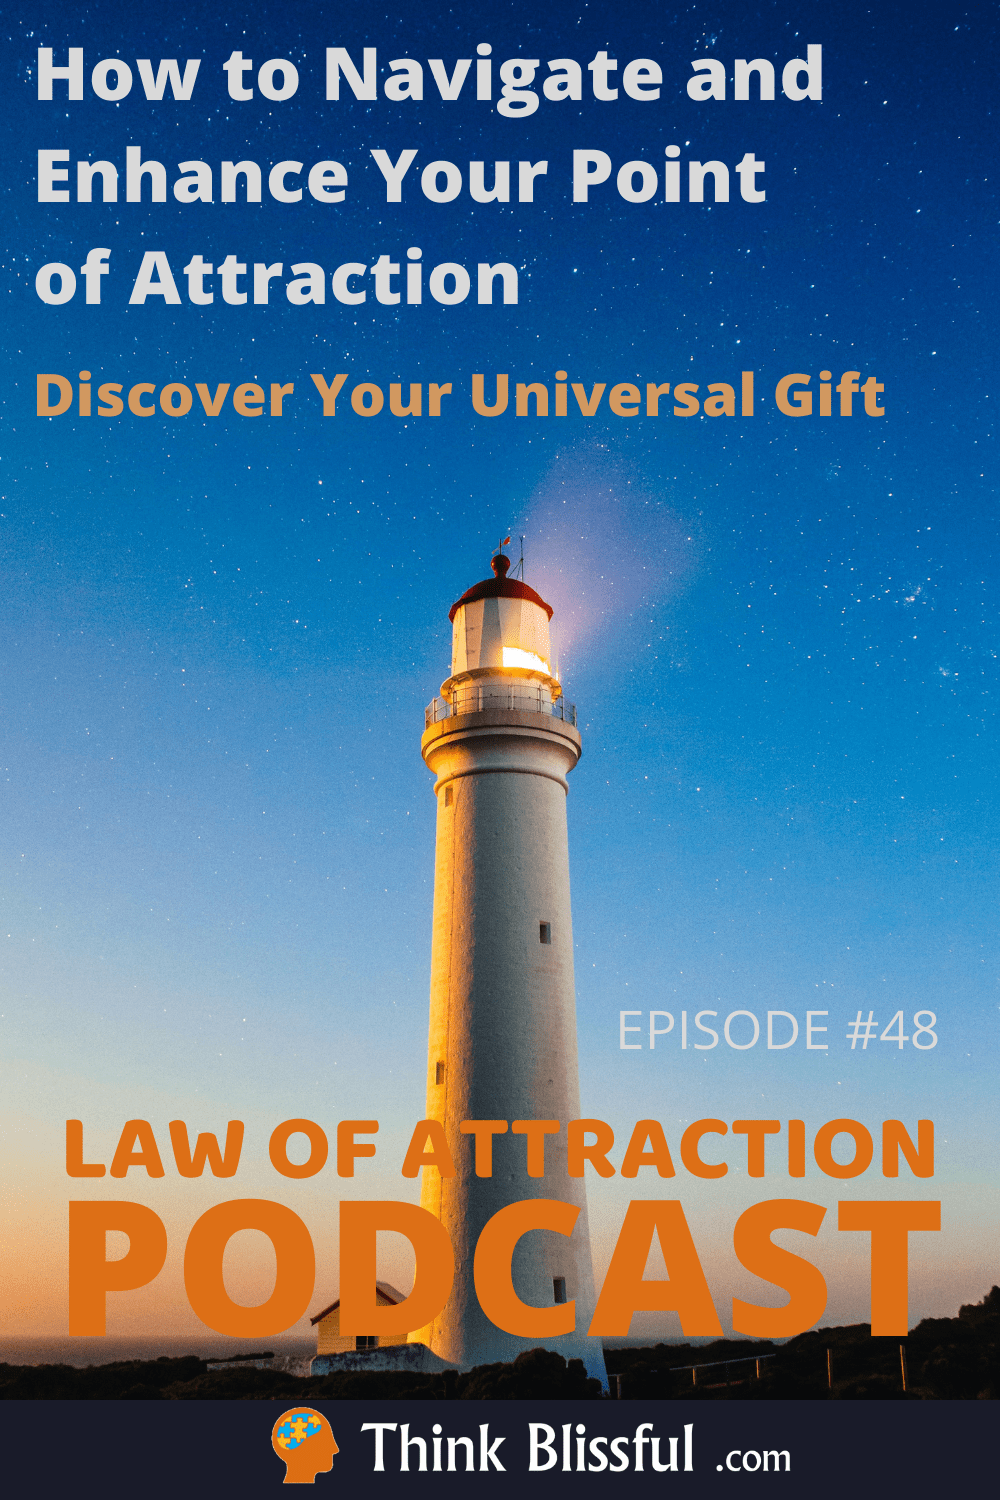 How to Navigate and Enhance Your Point of Attraction